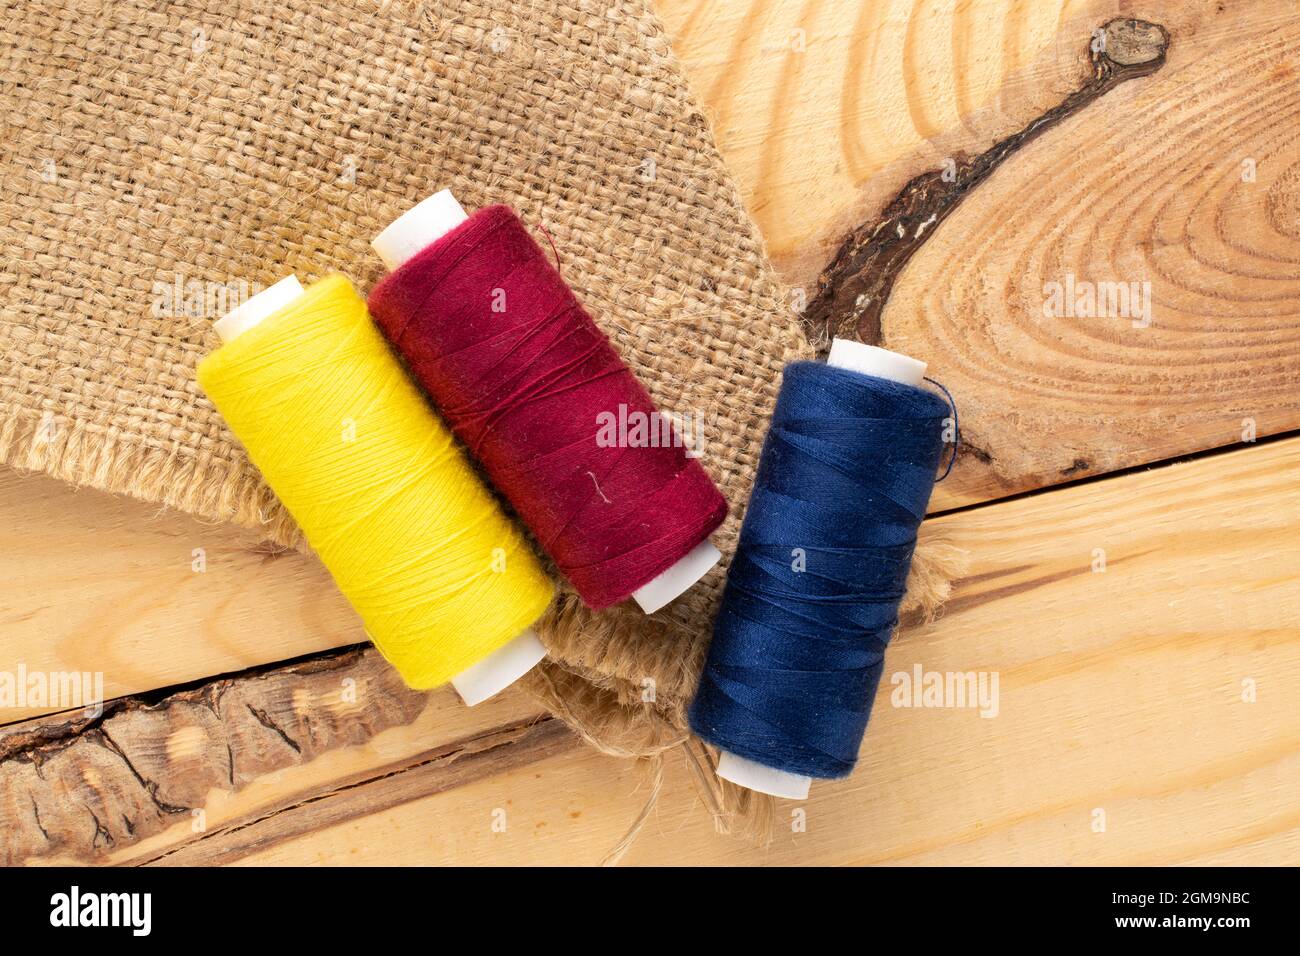 Several spools of colored thread, close-up, on a wooden table, top view. Stock Photo